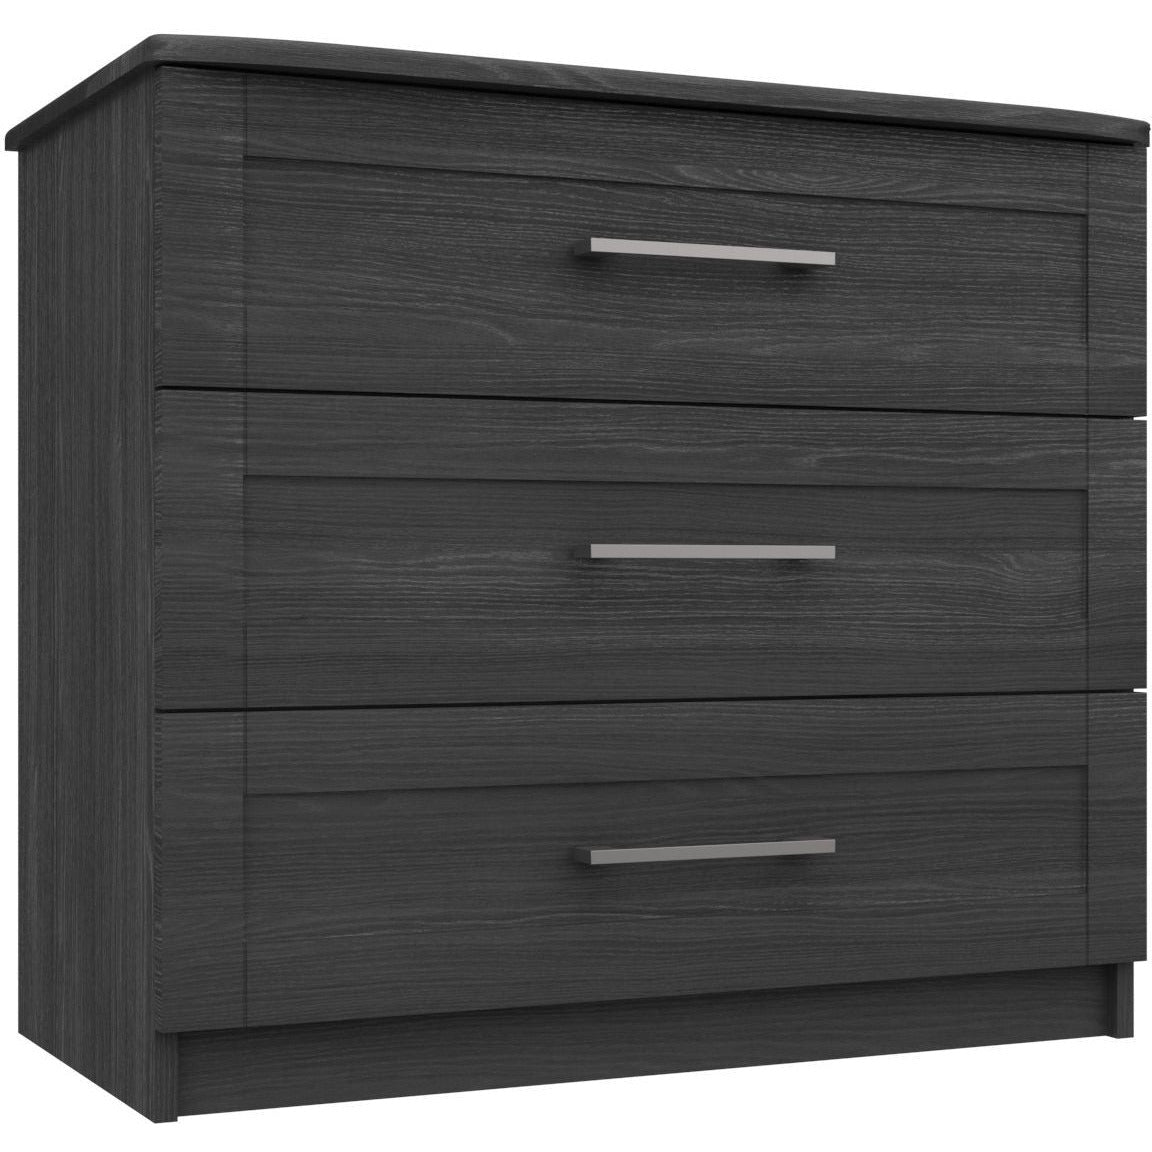 Andante 3 Drawer Chest